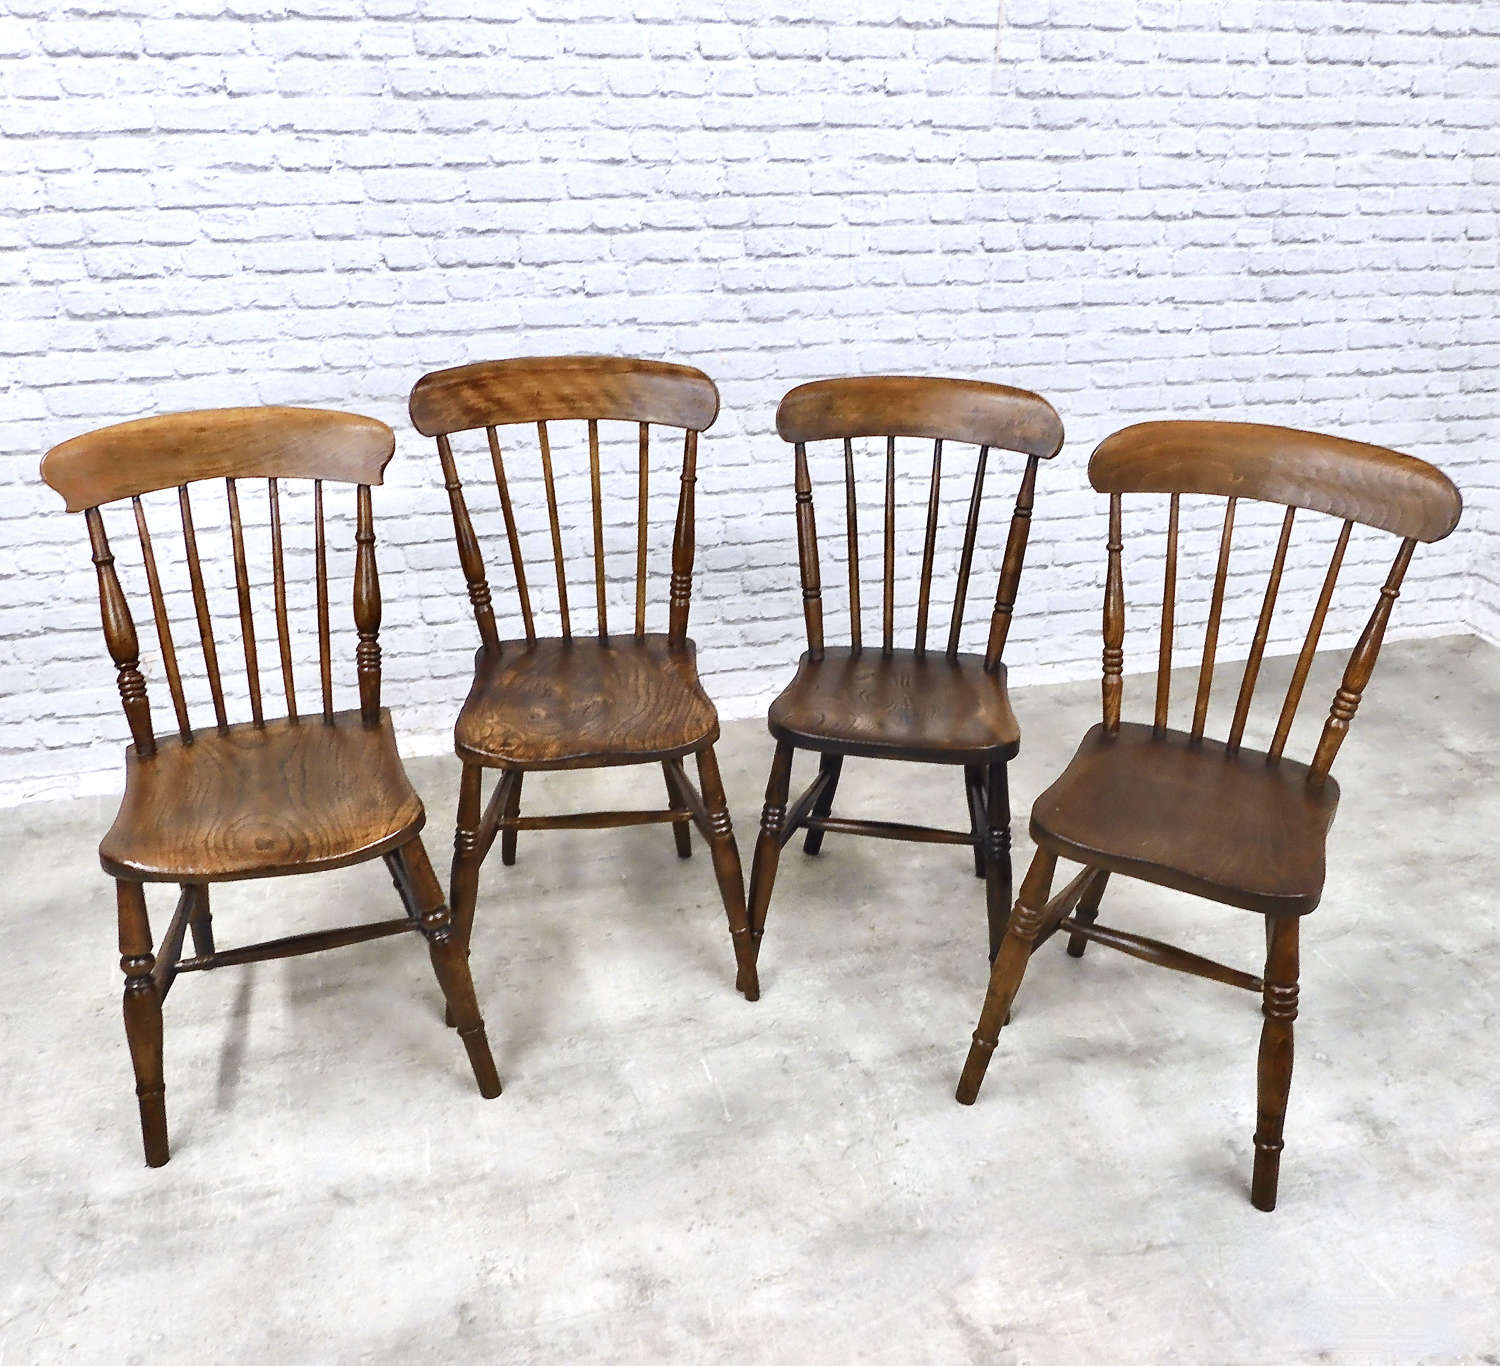 4x Stickback Country Kitchen Chairs